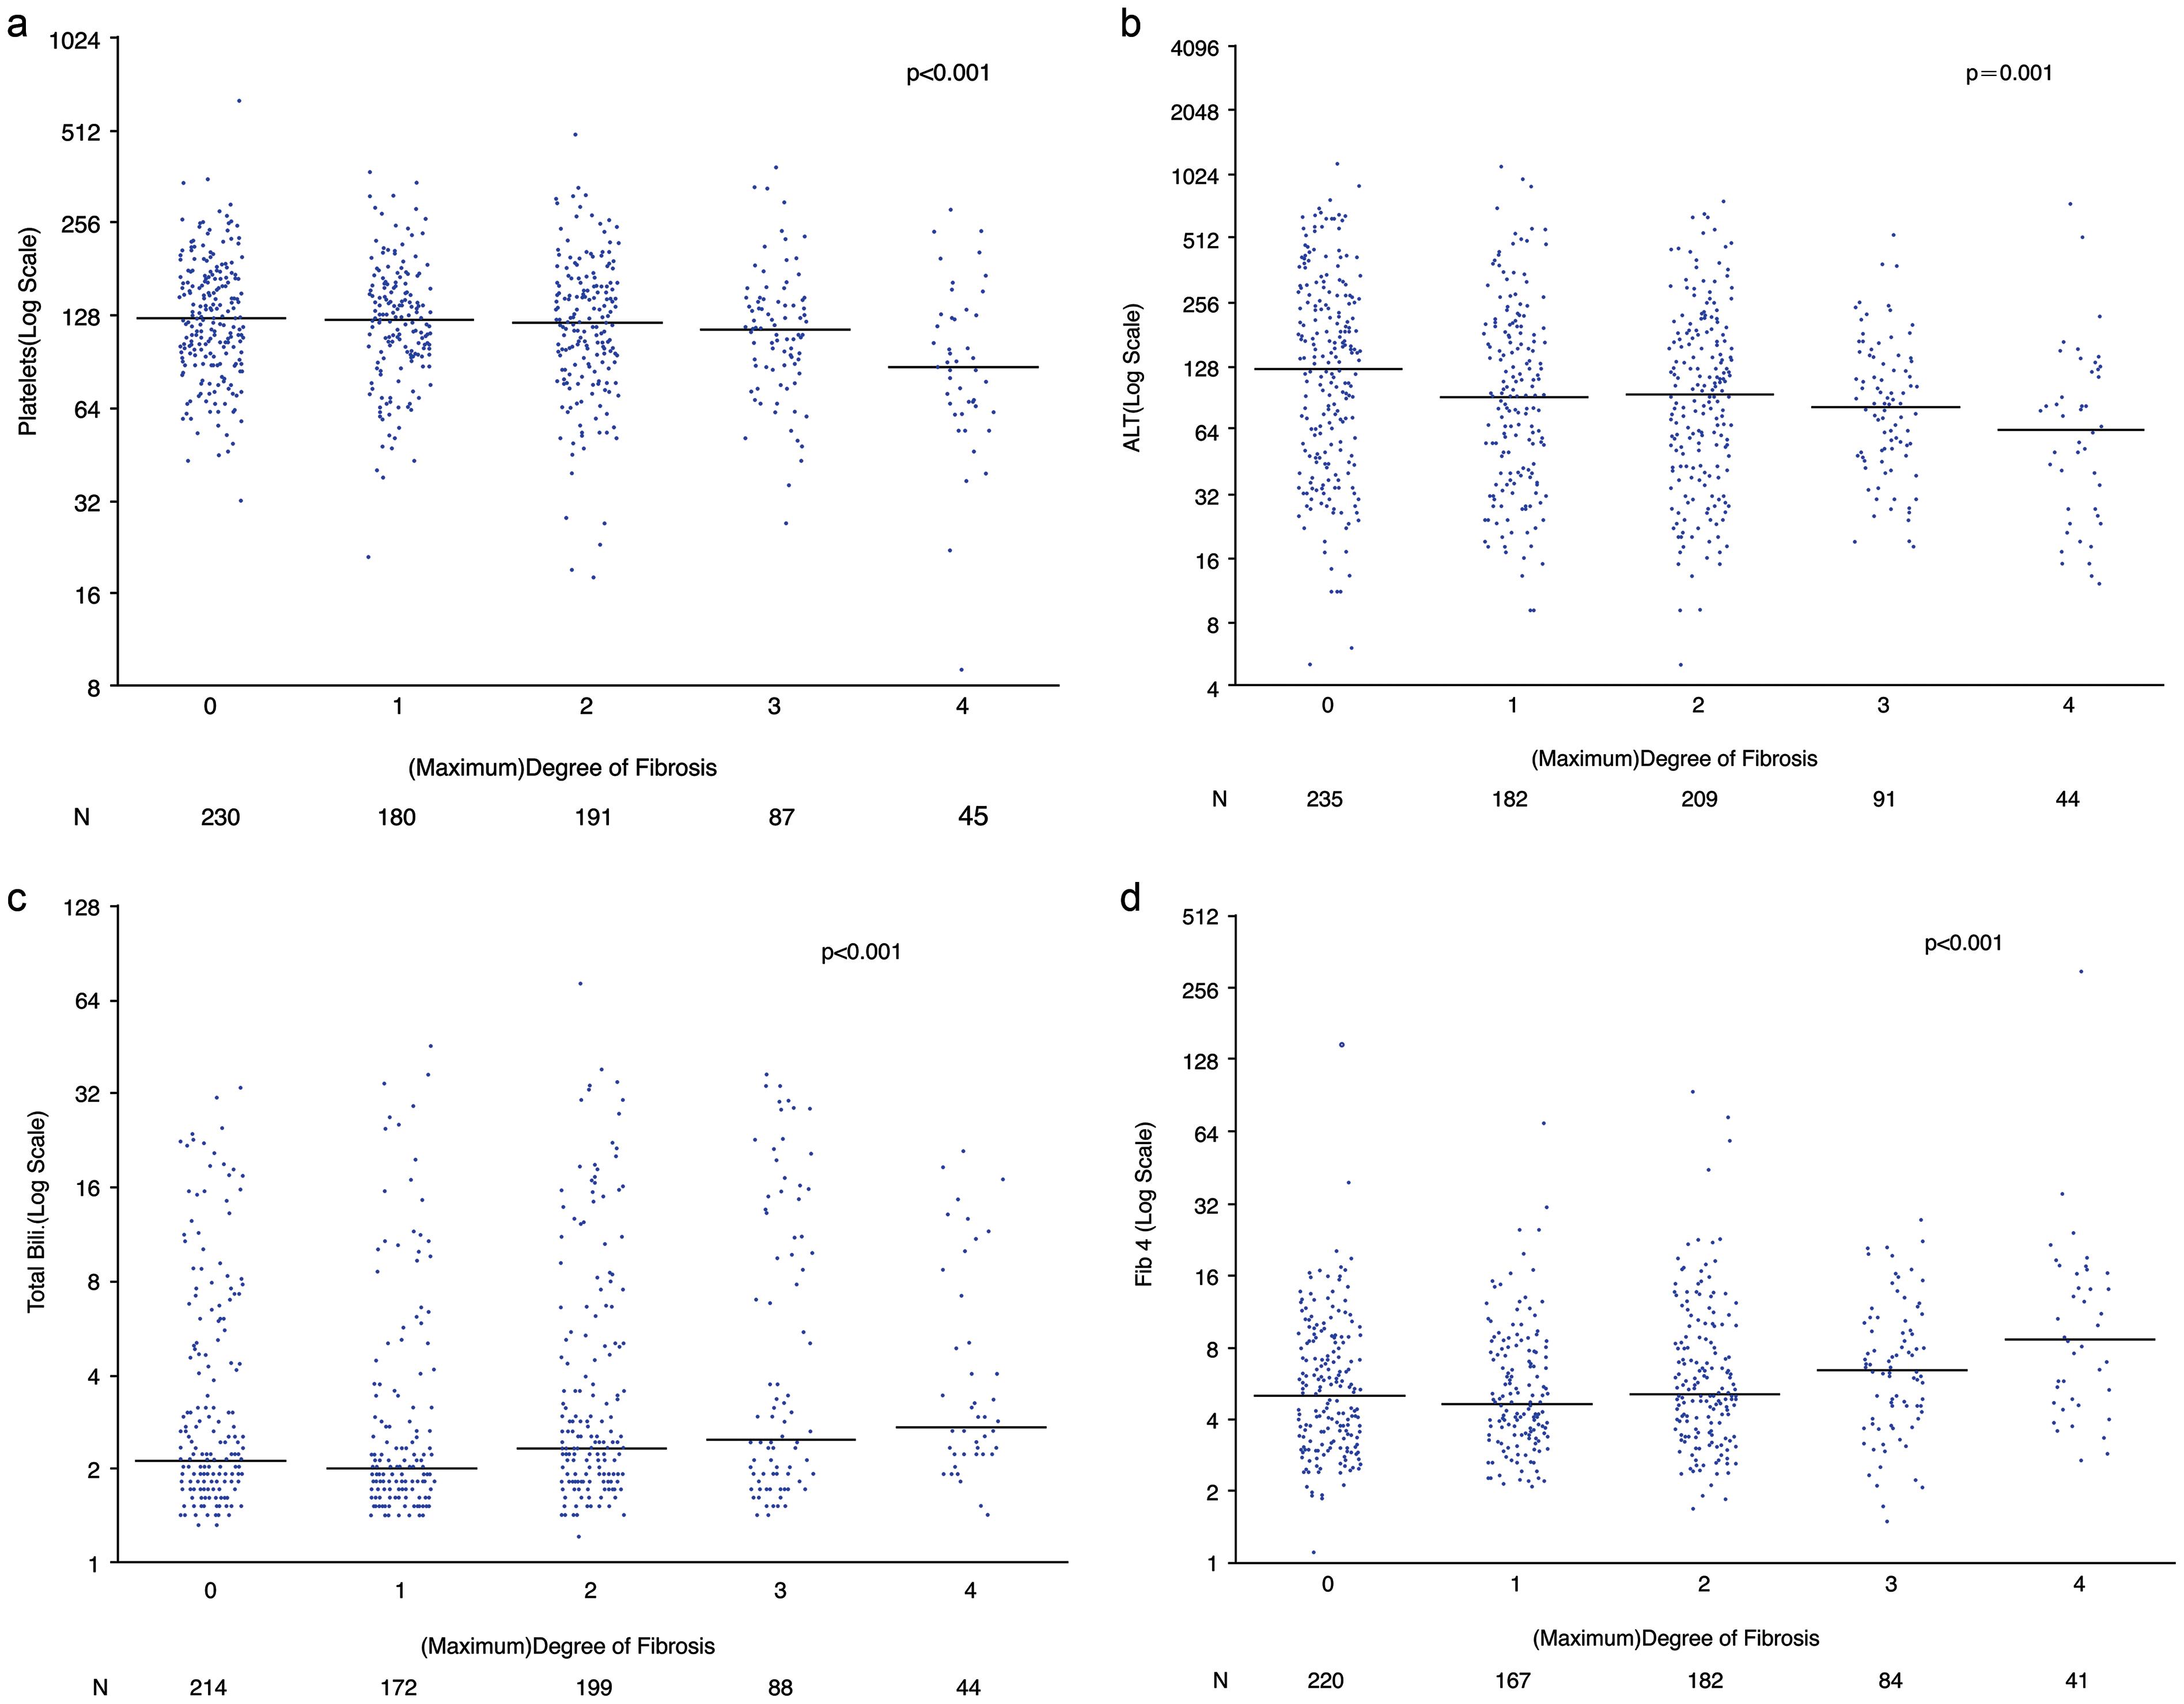 We used linear mixed effects models and dot plots to visualize patterns of association between the log transformed lab value or composite score and degree of fibrosis (METAVIR classification). Each blue dot represents an individual liver biopsy, and the total number of biopsies in each categorical degree of fibrosis is listed as N. The horizontal lines represent the median values across each degree of fibrosis.